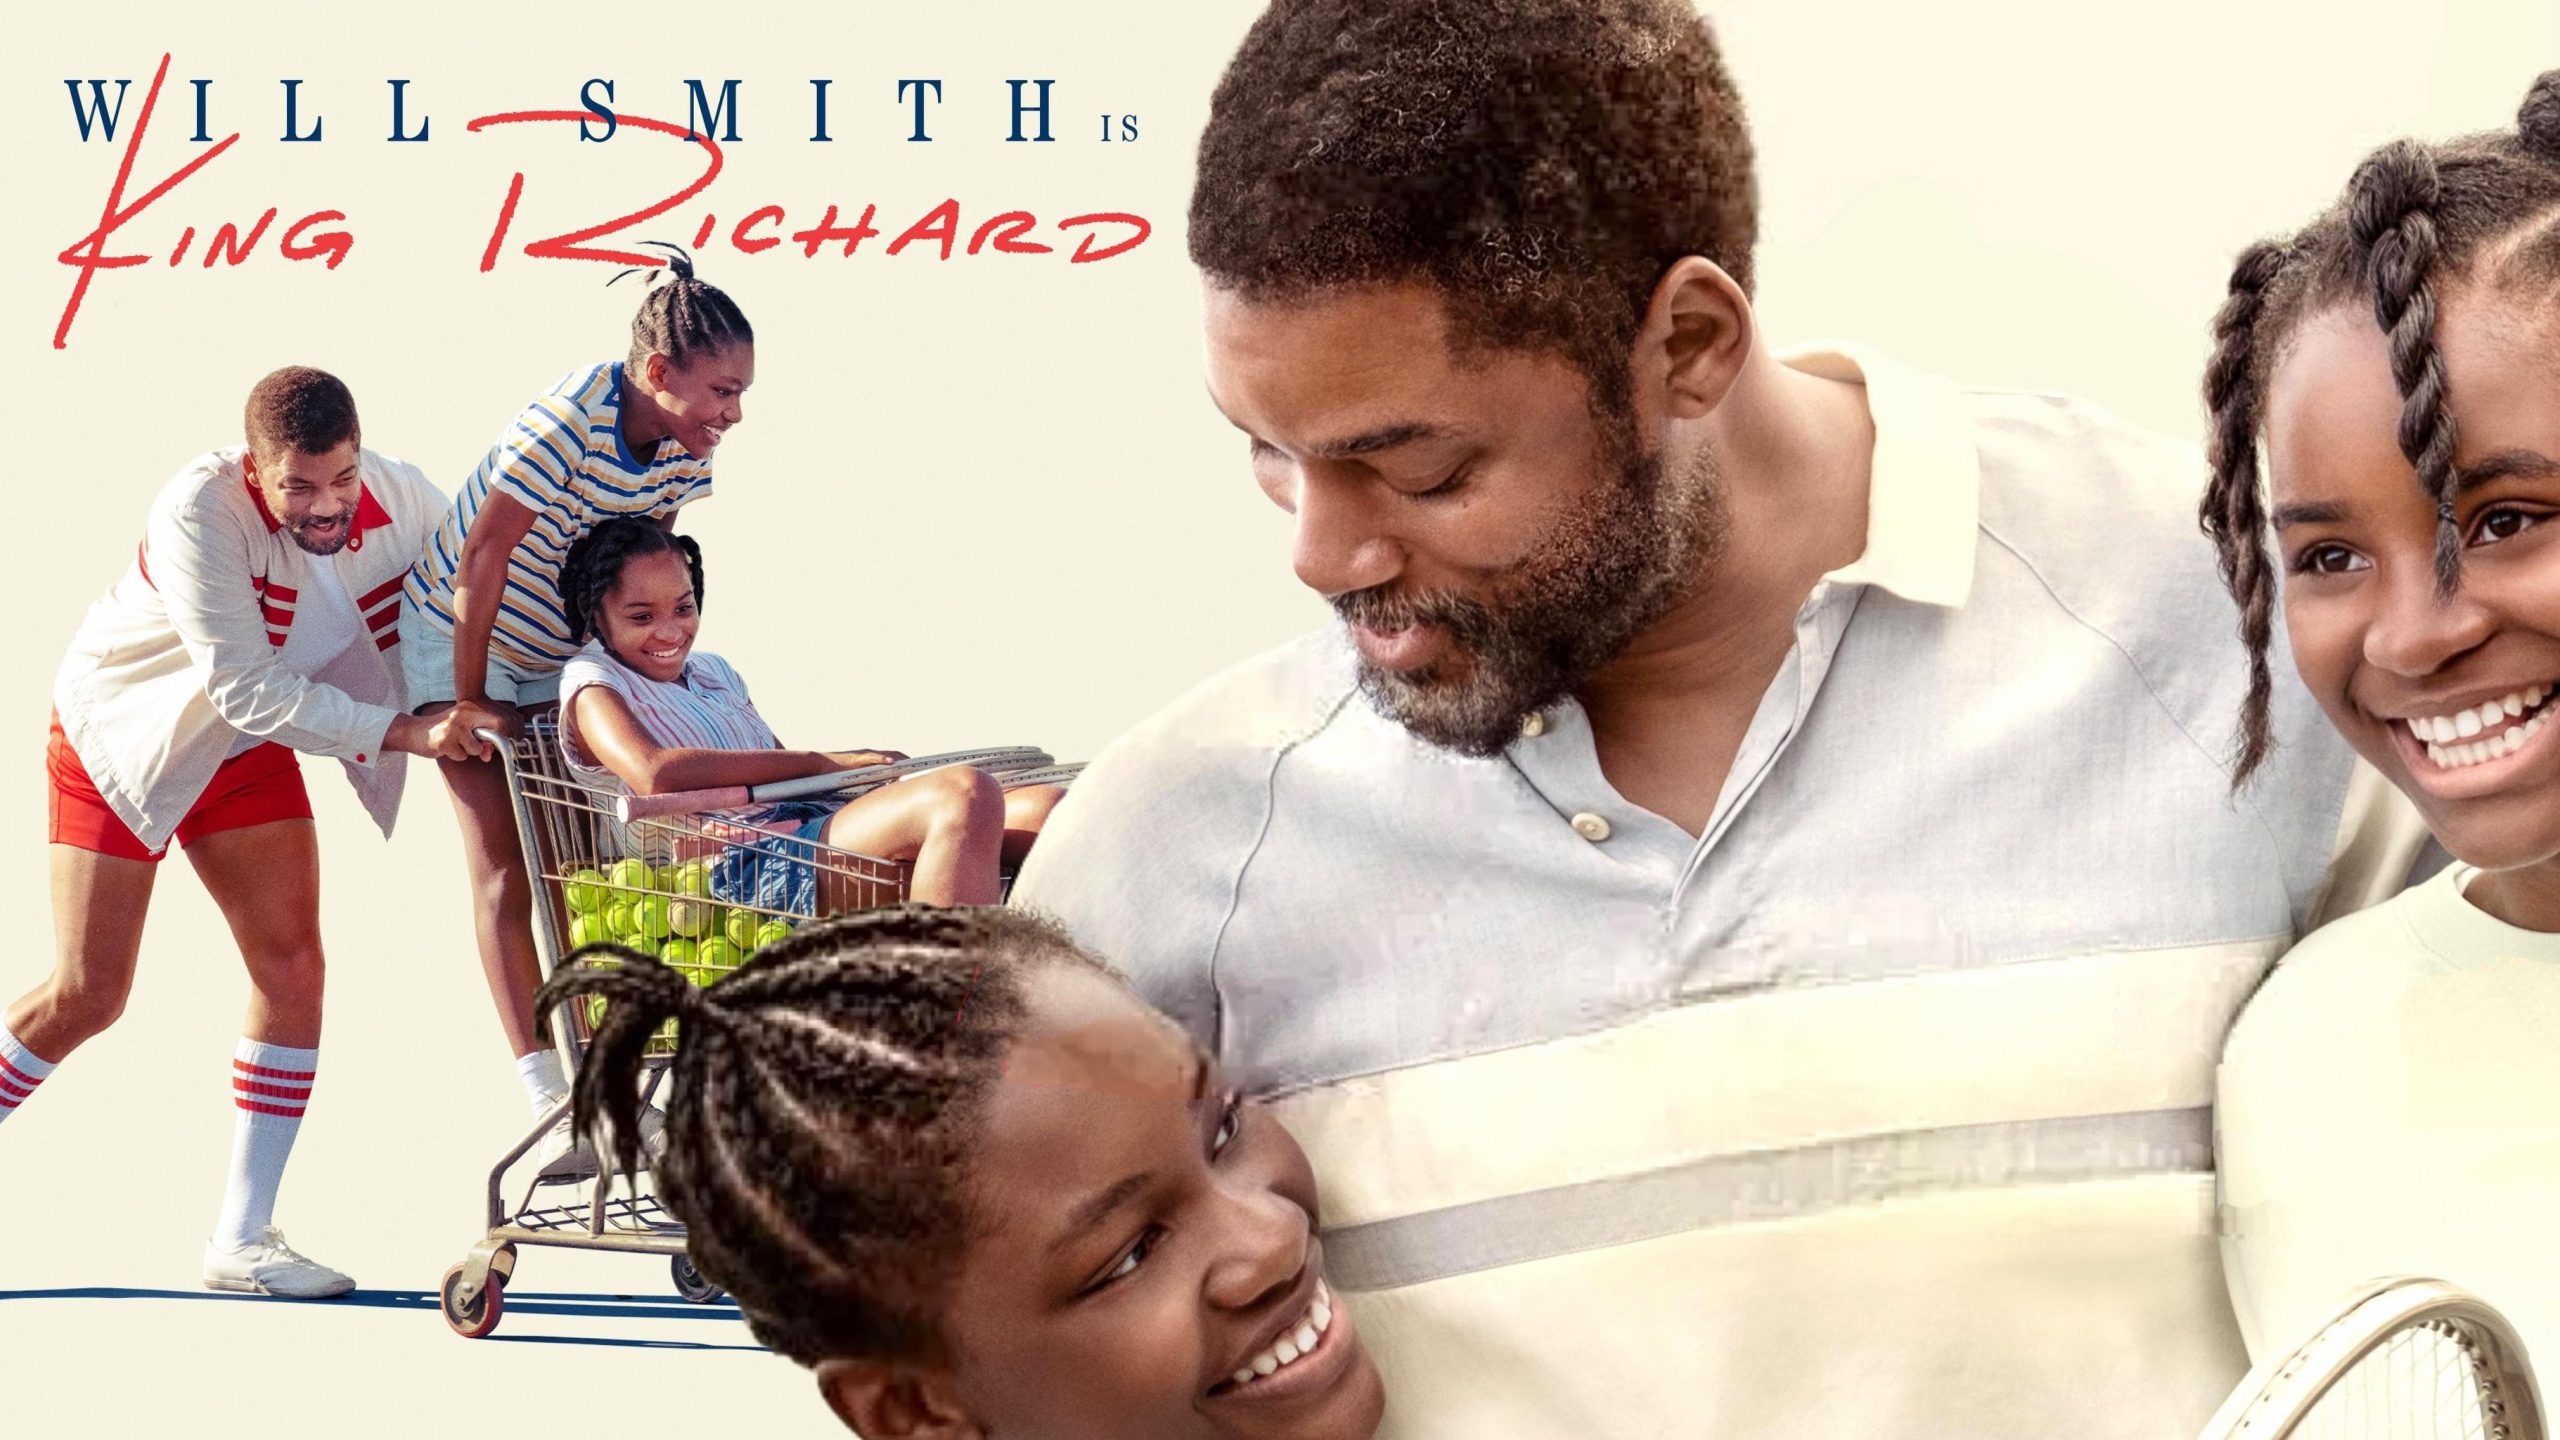 Will Smith (King Richard): Named one of the ten best films of the year by both the American Film Institute and the National Board of Review. 2560x1440 HD Background.